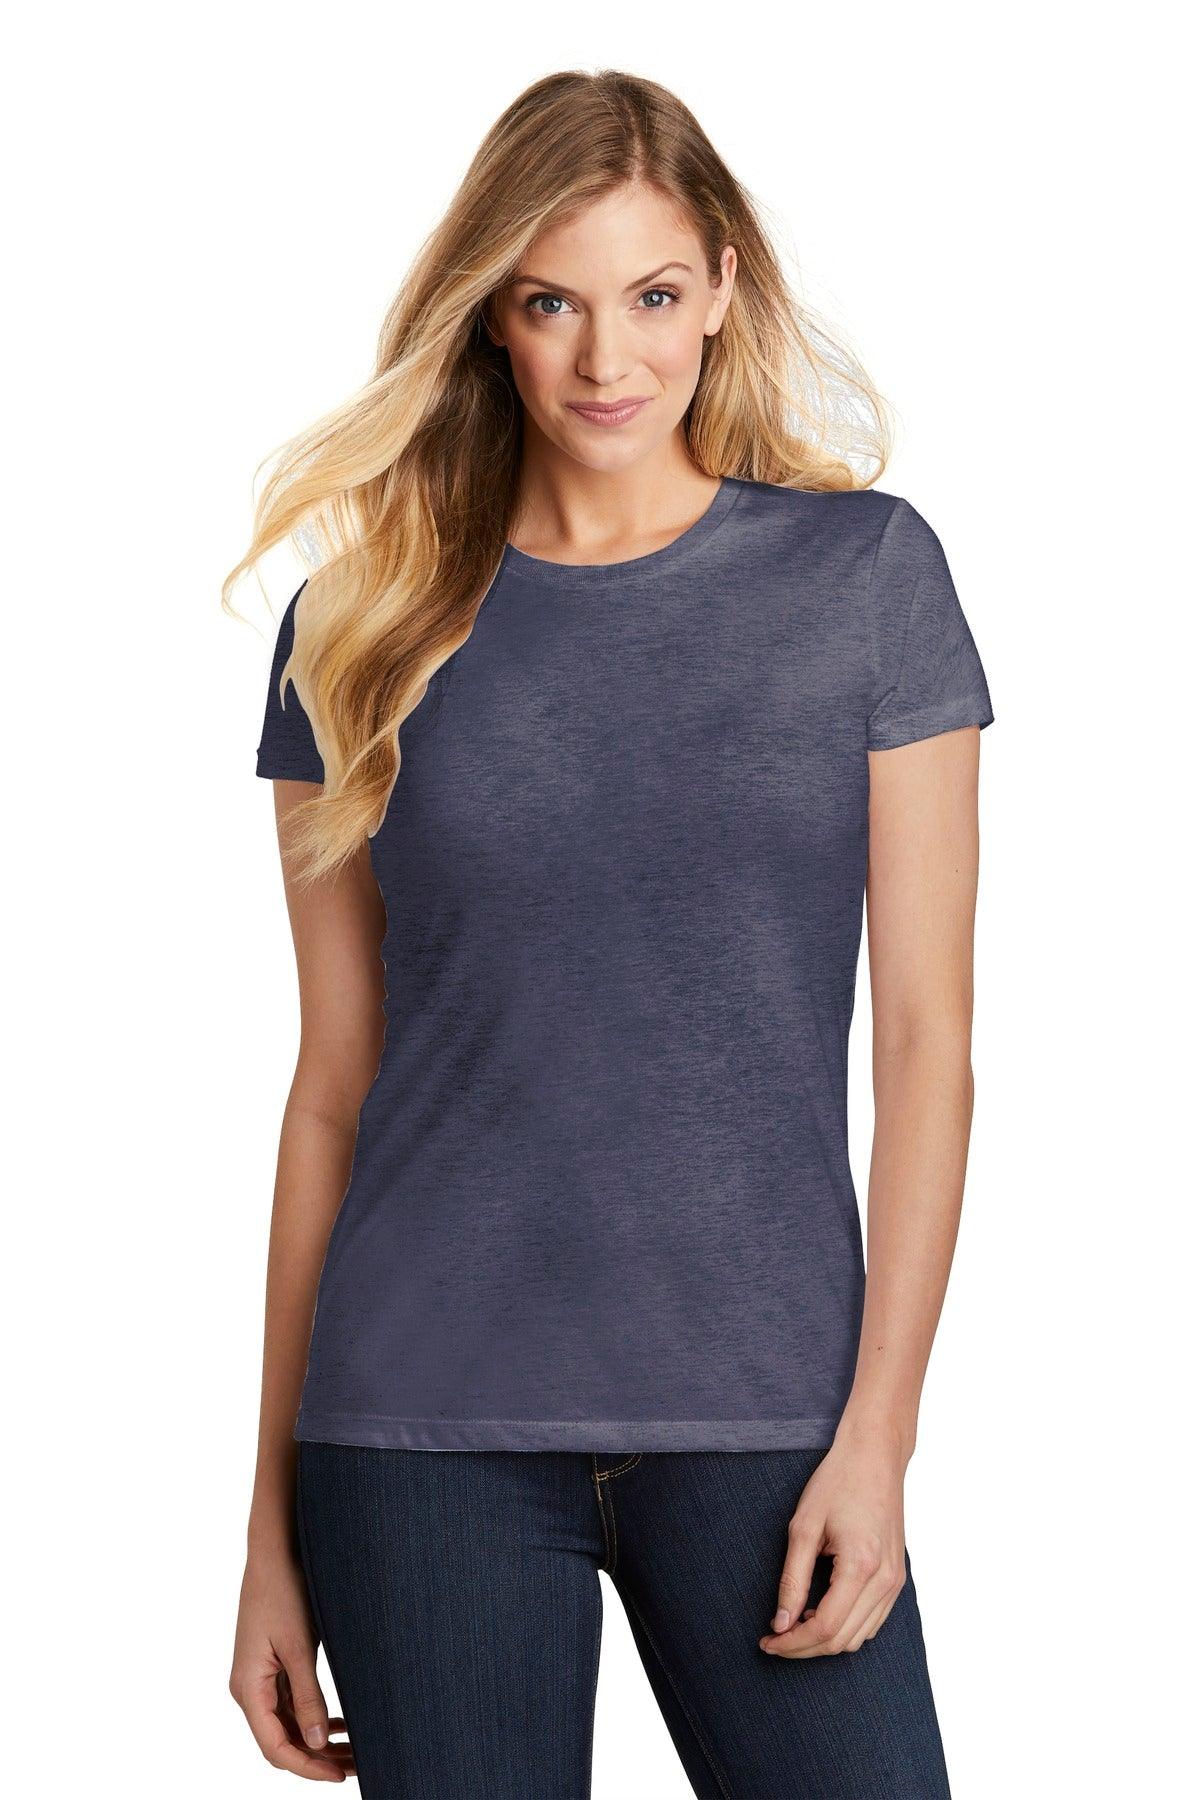 District Women's Fitted Perfect Tri Tee. DT155 - Dresses Max